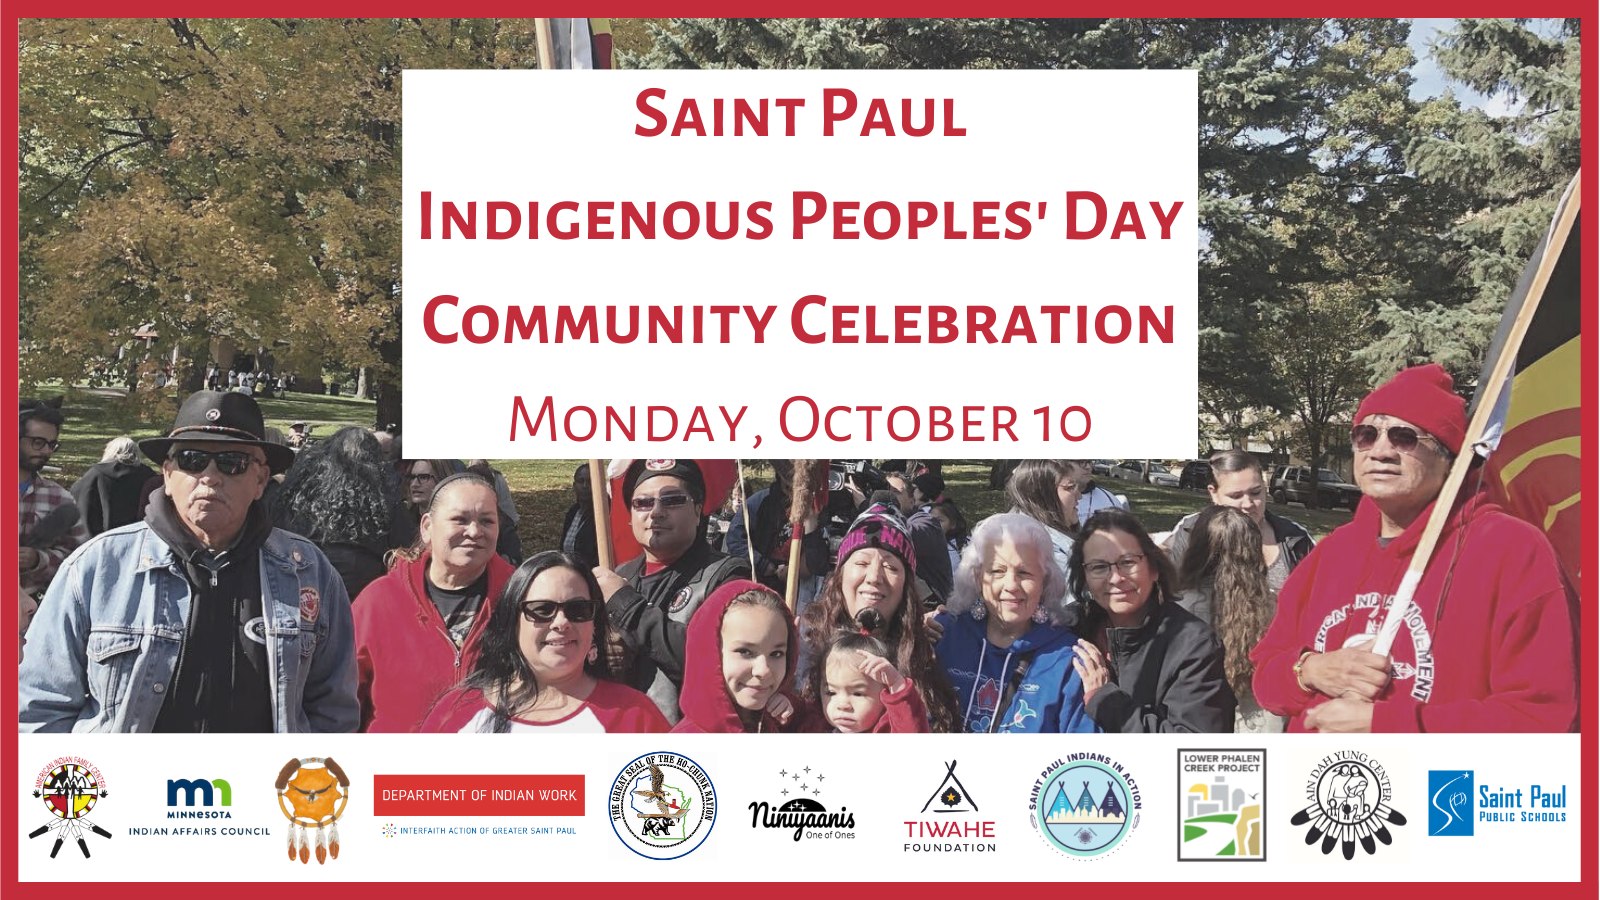 "Saint Paul Indigenous People's Day Community Celebration, Monday, October 10" in red letters on a white background overlayed on a picture of a group of People marching in a parade, with logos from organizing groups below them